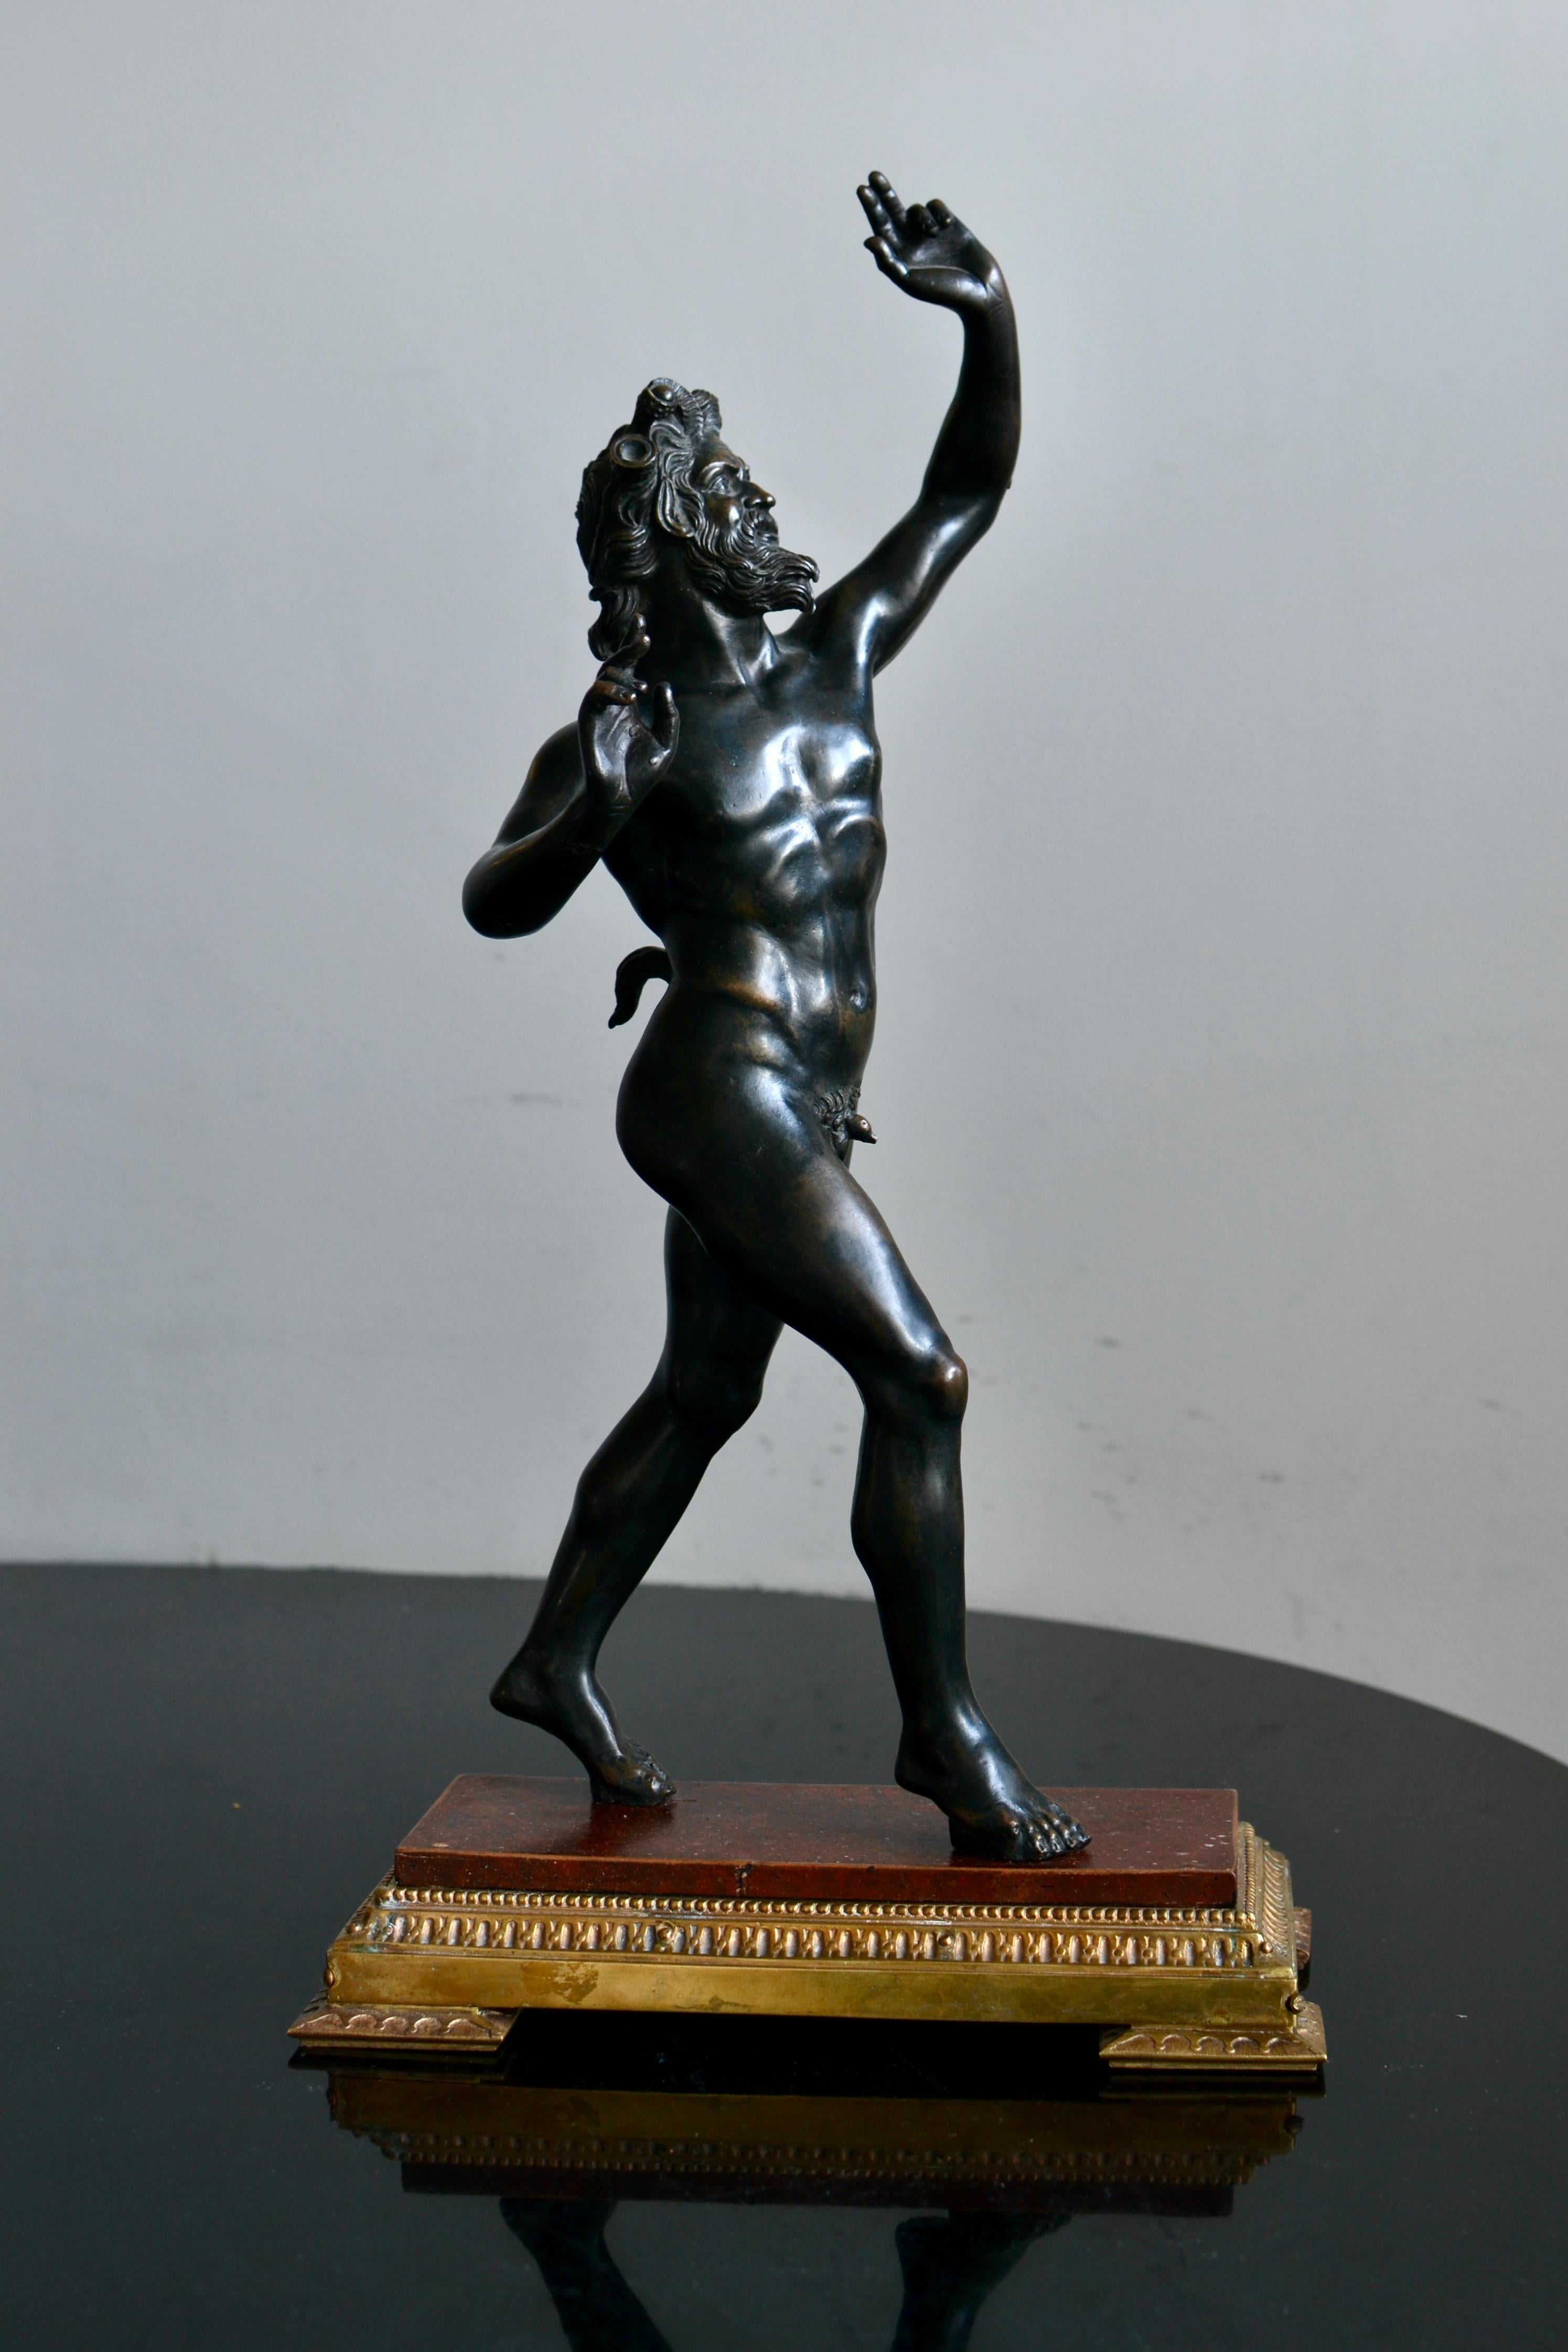 A finely cast Grand Tour bronze sculpture of The Dancing Faun or Il Fauno Danzante. On a gilt-bronze base. With a nice and beautiful surface patina.

The Dancing Faun was discovered in 1830 in the ruins of the most impressive and opulent Roman home